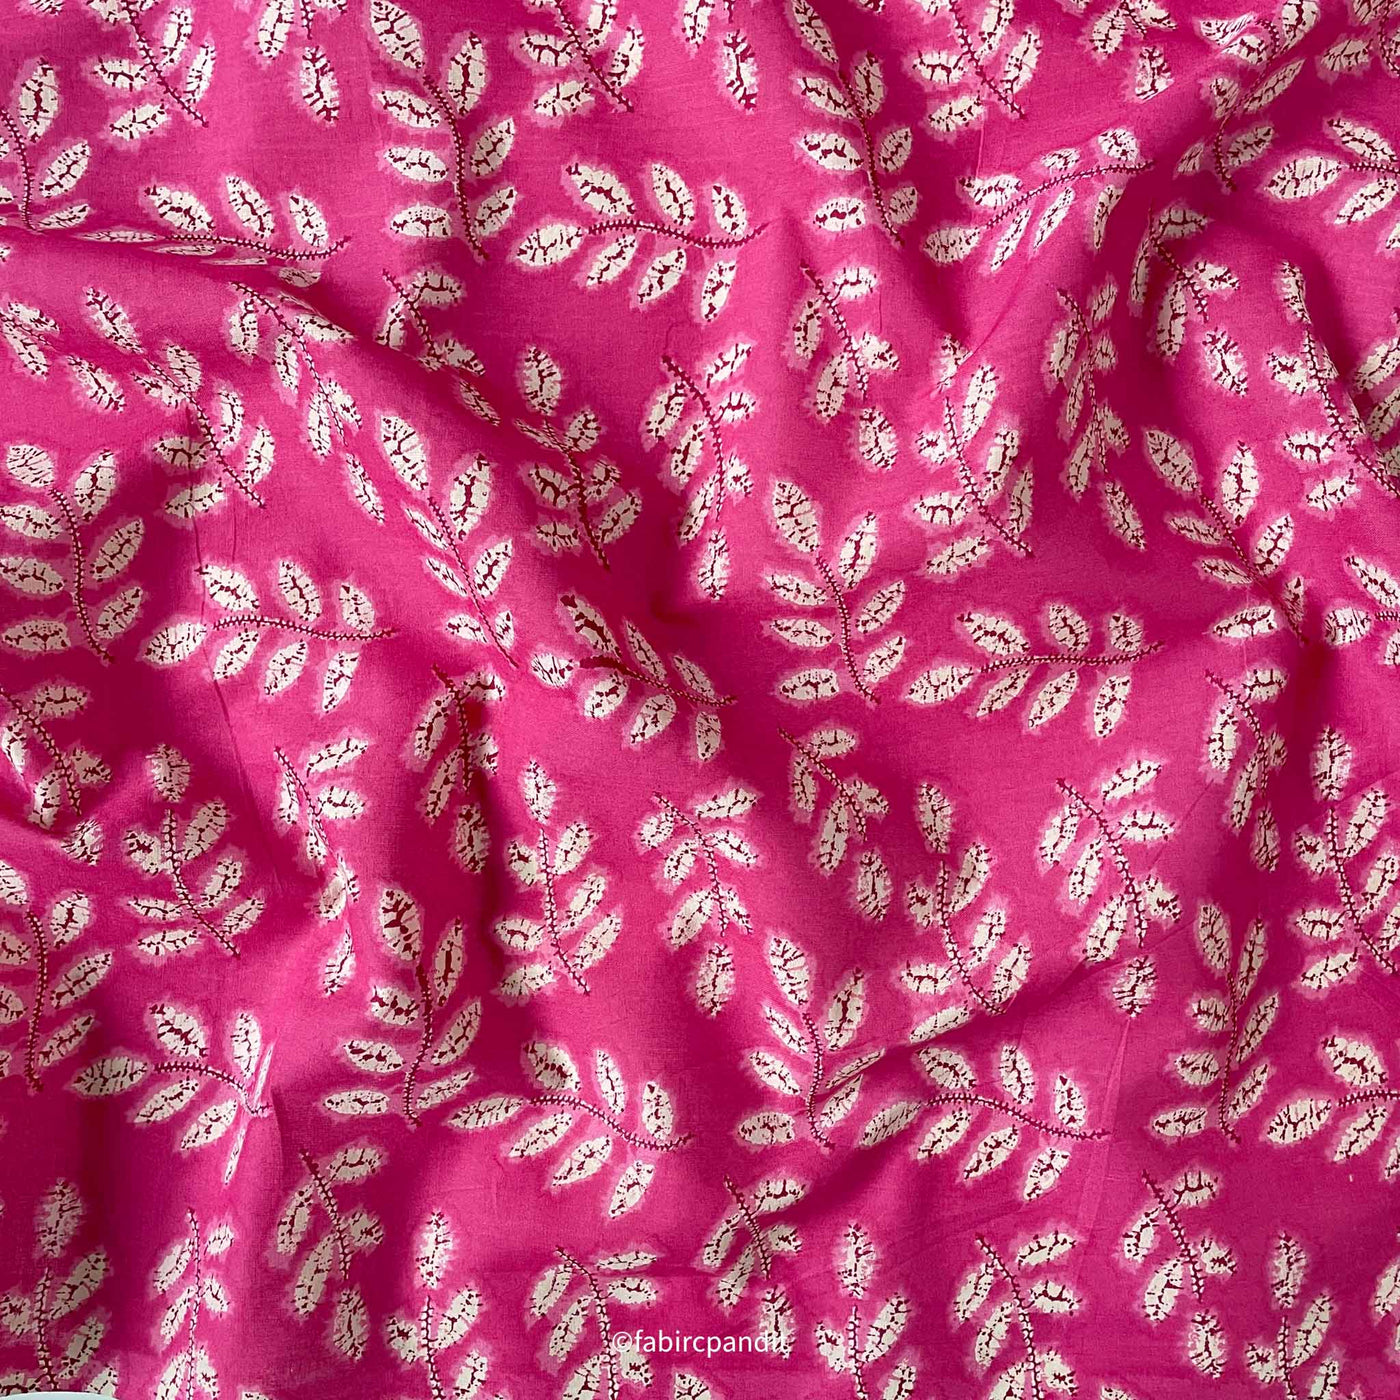 Fabric Pandit Fabric Deep Pink and Cream Leaves and Petals All Over Hand Block Printed Pure Cotton Fabric (Width 43 inches)